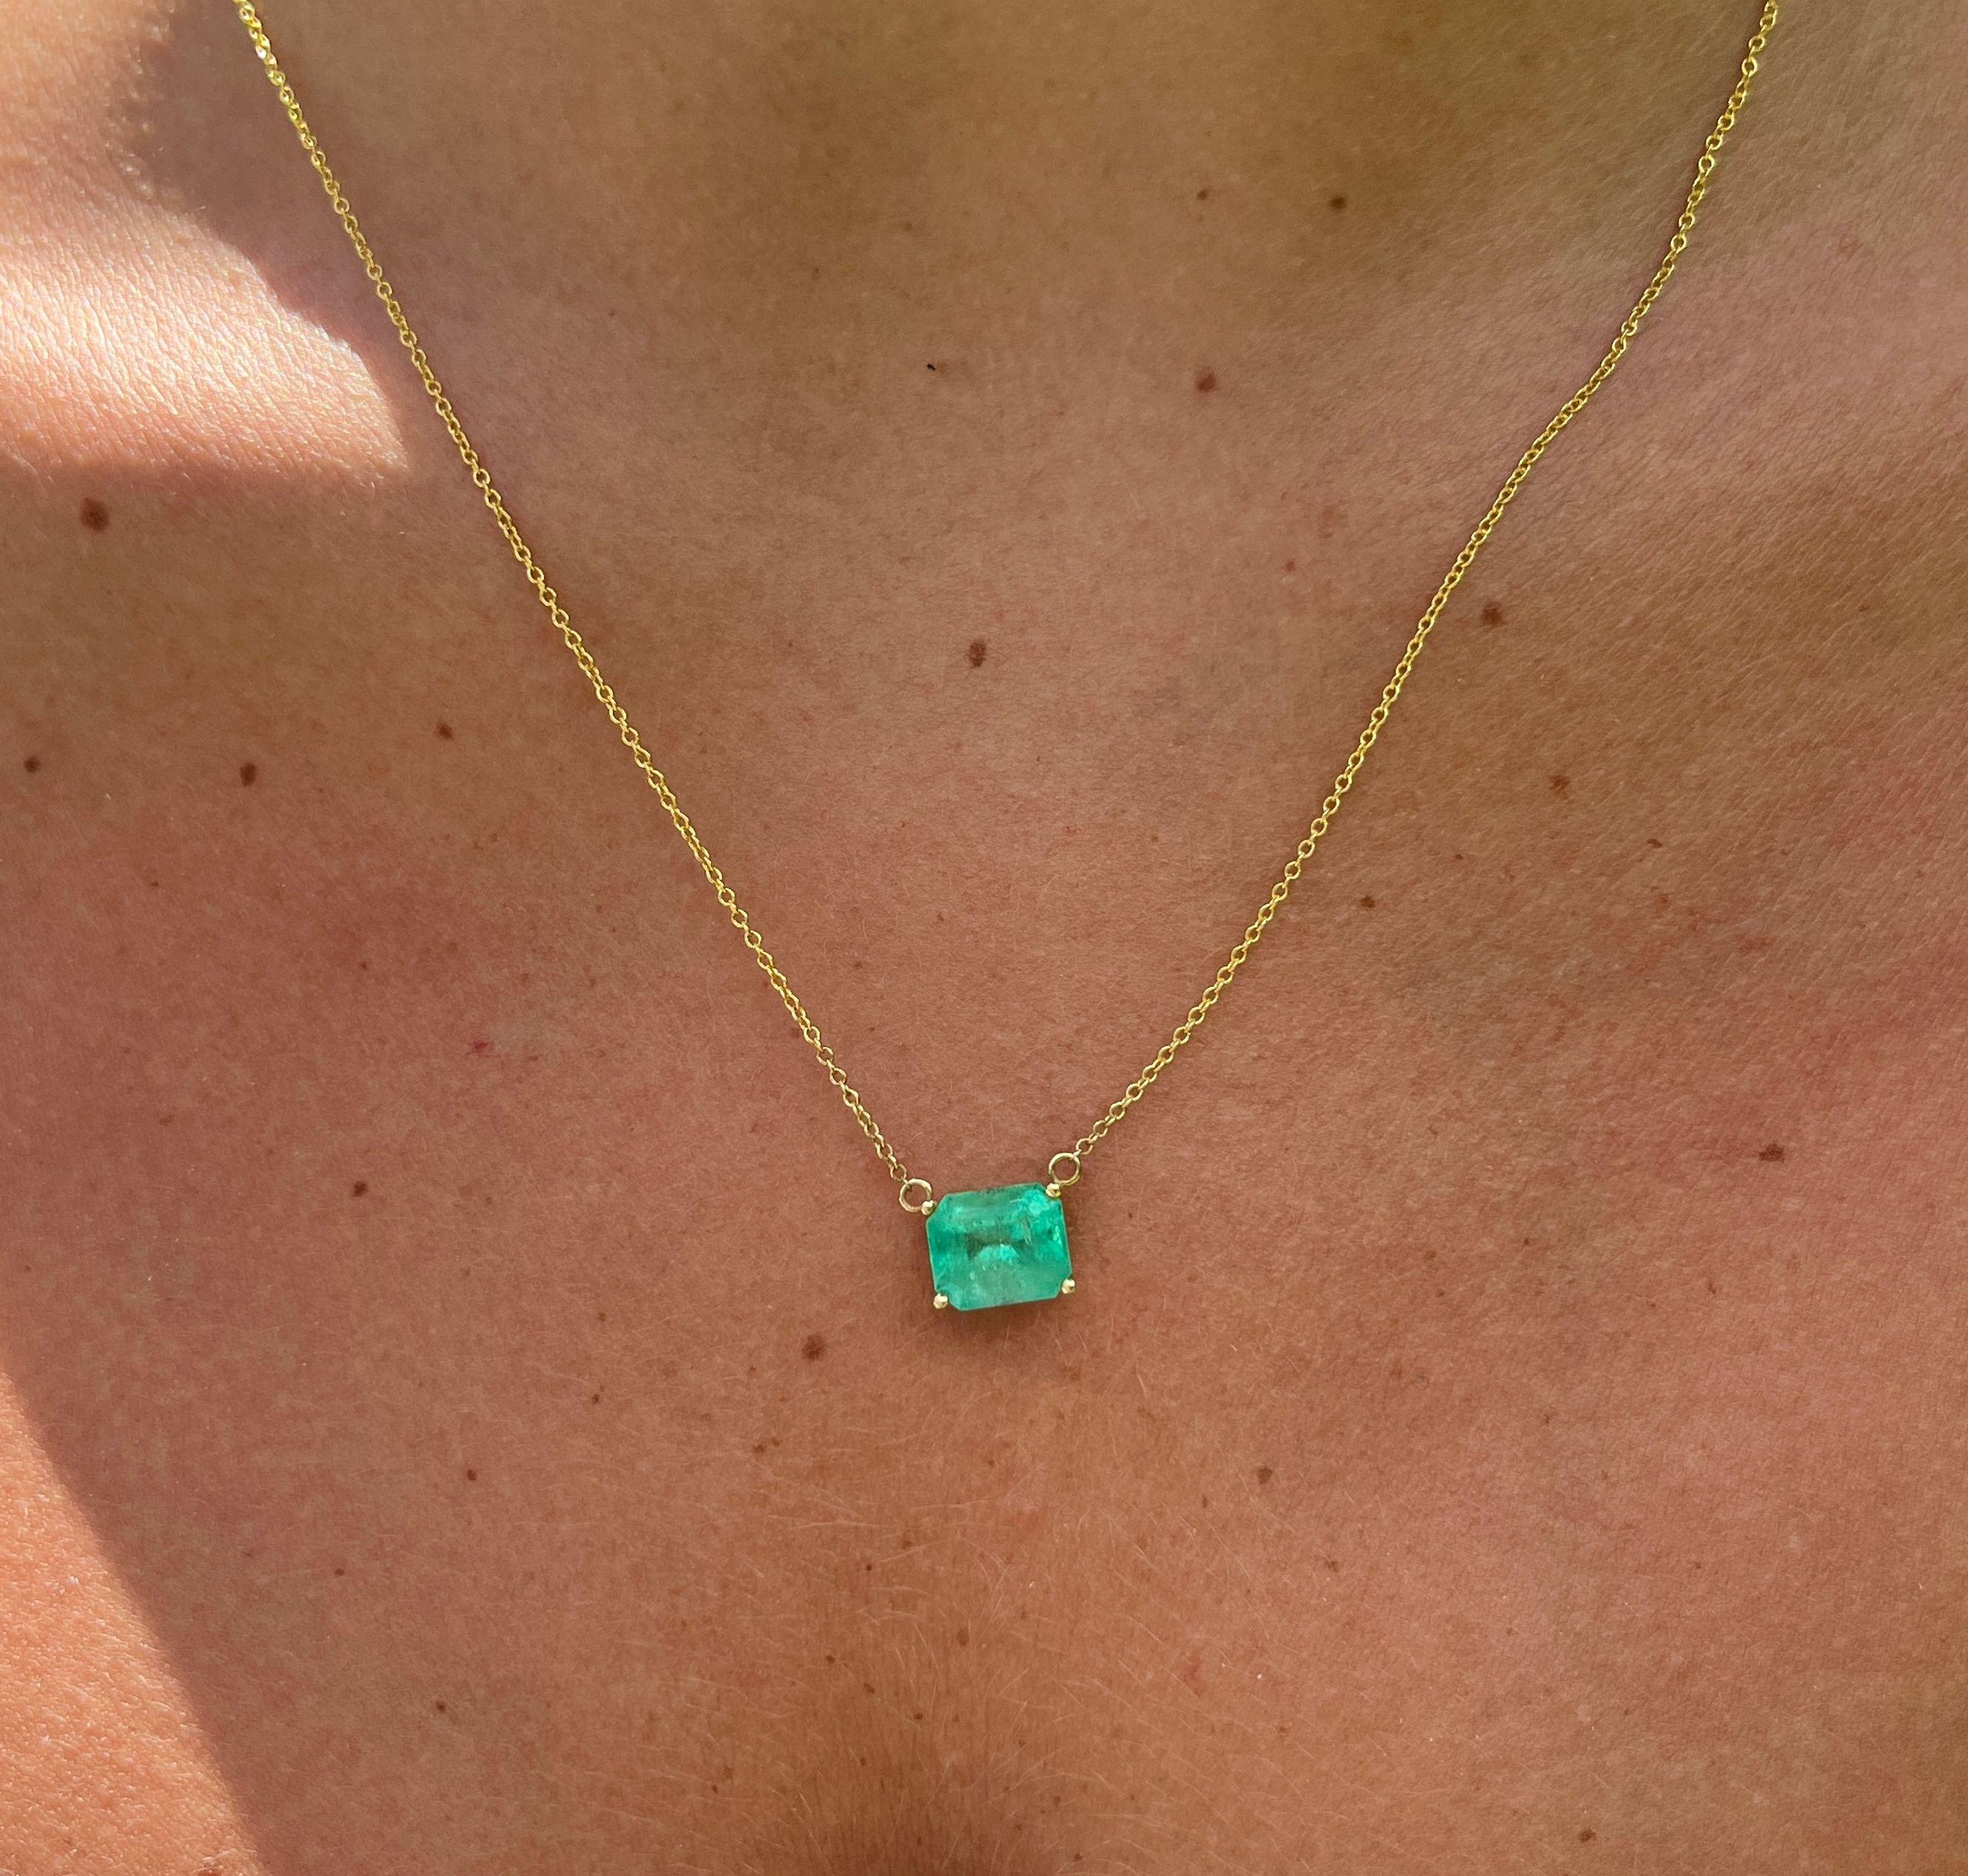 Emerald Cut 3.6 Carat Colombian Emerald Solitaire East West Pendant Necklace in 14K Gold For Sale